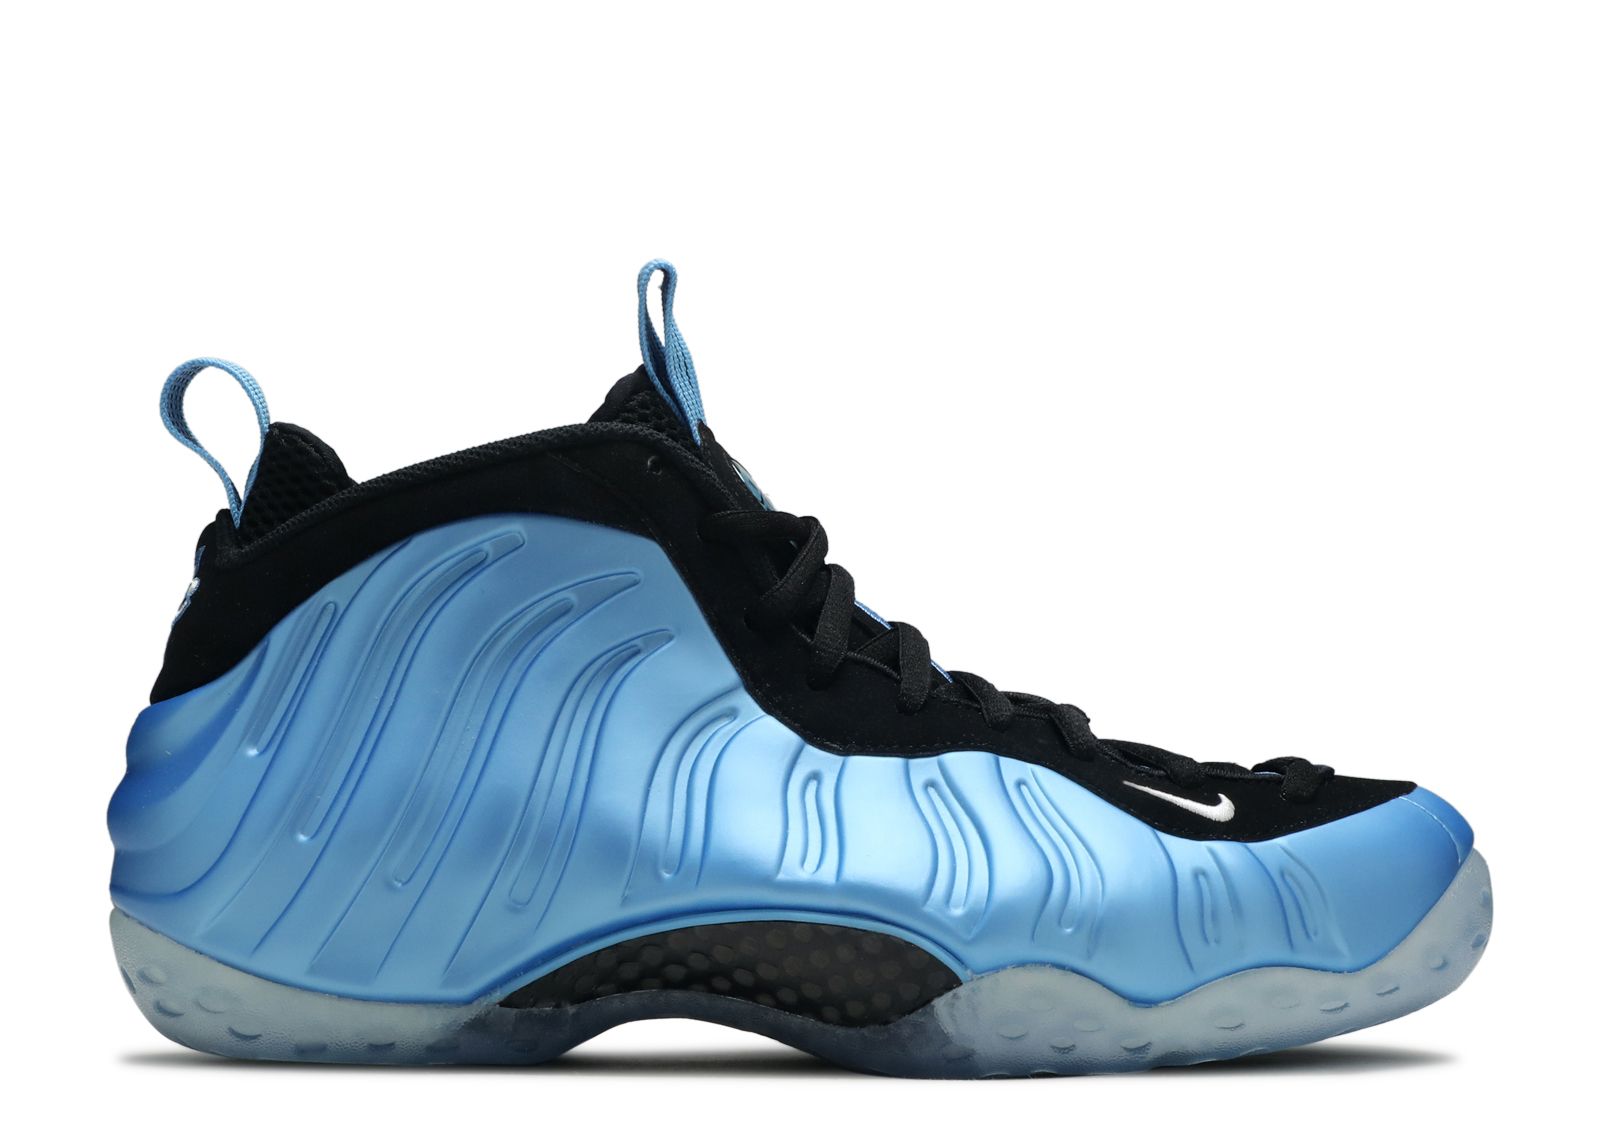 Ring in the New Year with Nike's Blue Mirror Foamposite